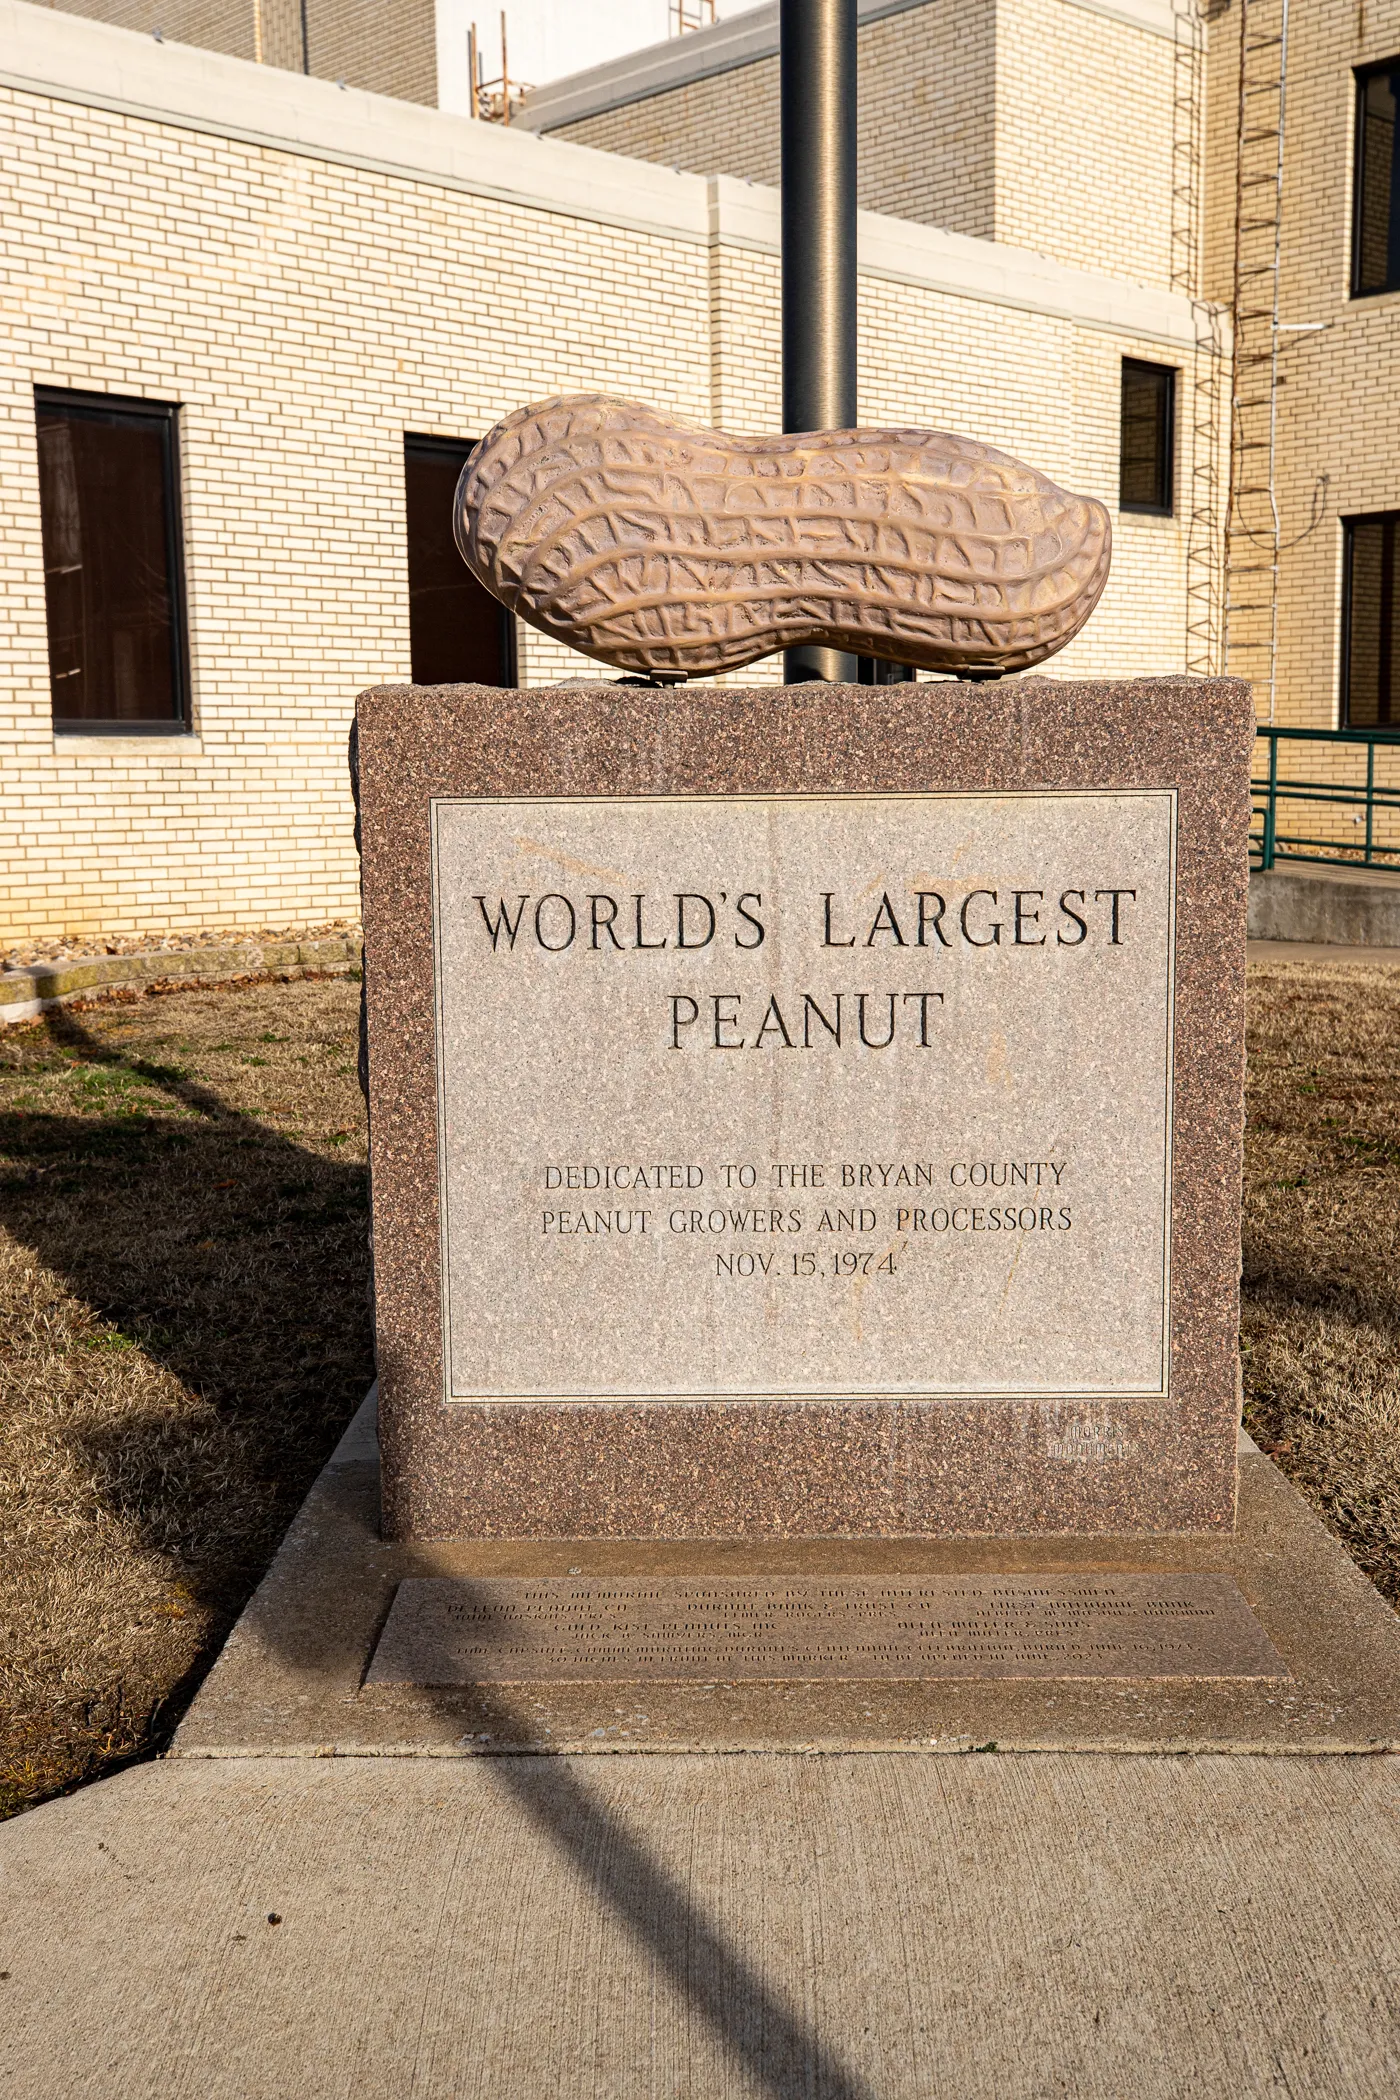 World's Largest Peanut in Durant, Oklahoma roadside attraction